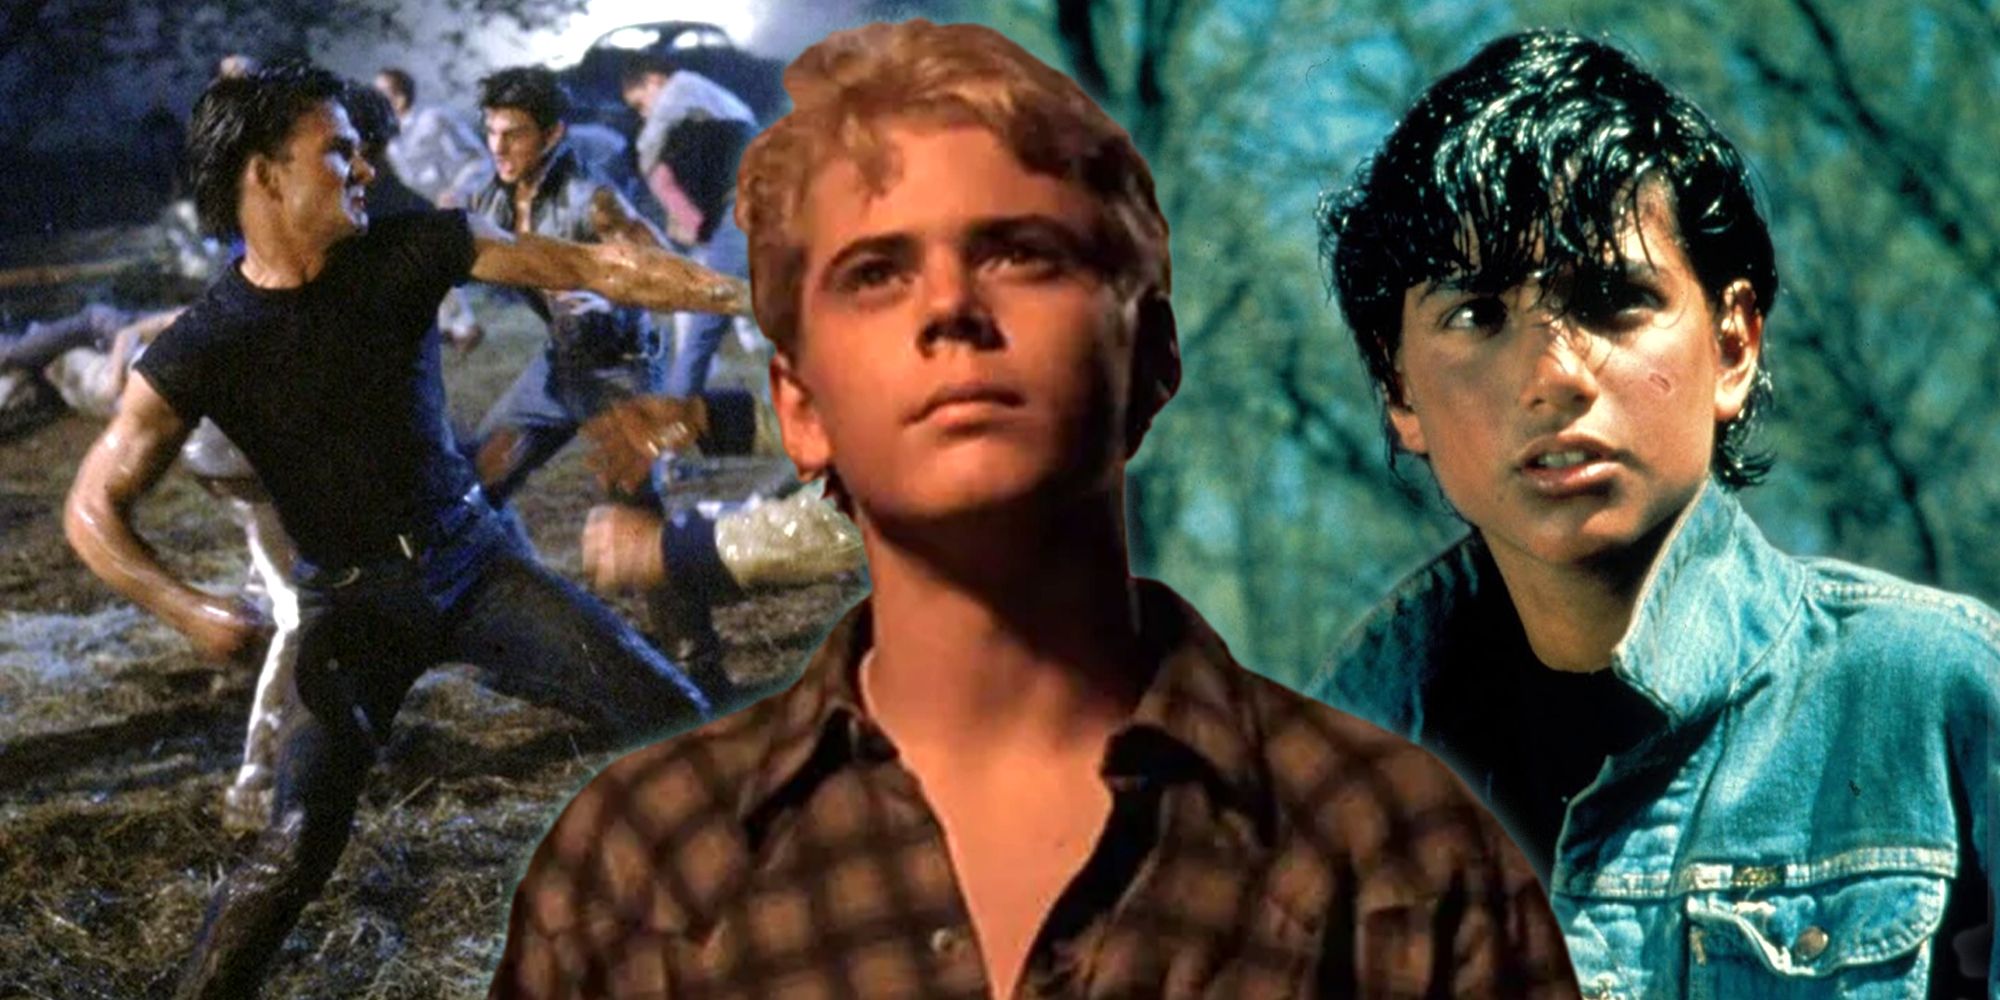 The Outsiders Differences Between The Movie And The Book featured image of Darry Ponyboy and Johnny